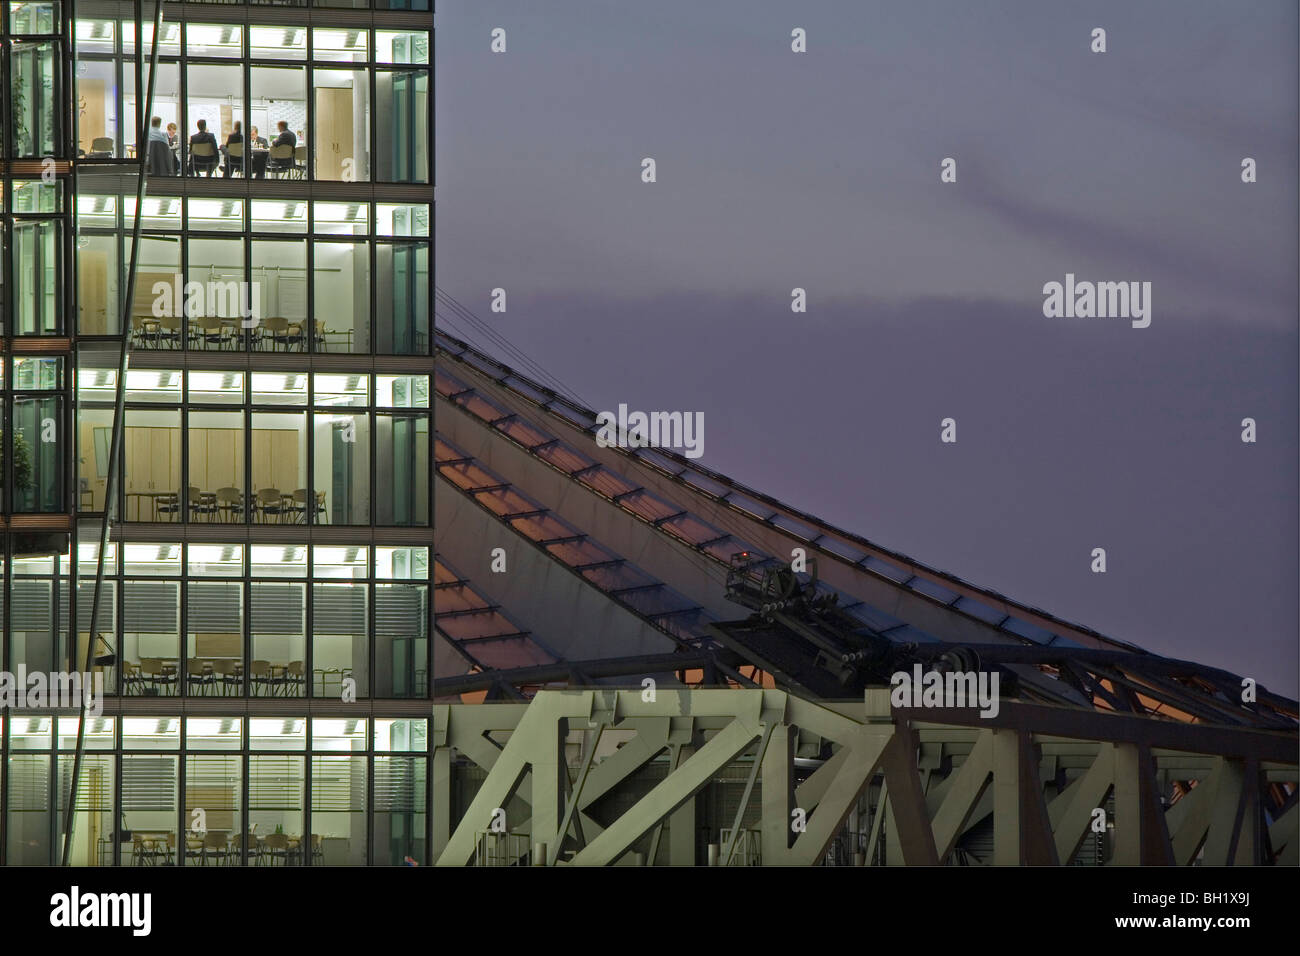 conference rooms at night, Bahntower, Potsdam Square, Potsdamer Platz, Sony Center roof, Berlin, Germany Stock Photo